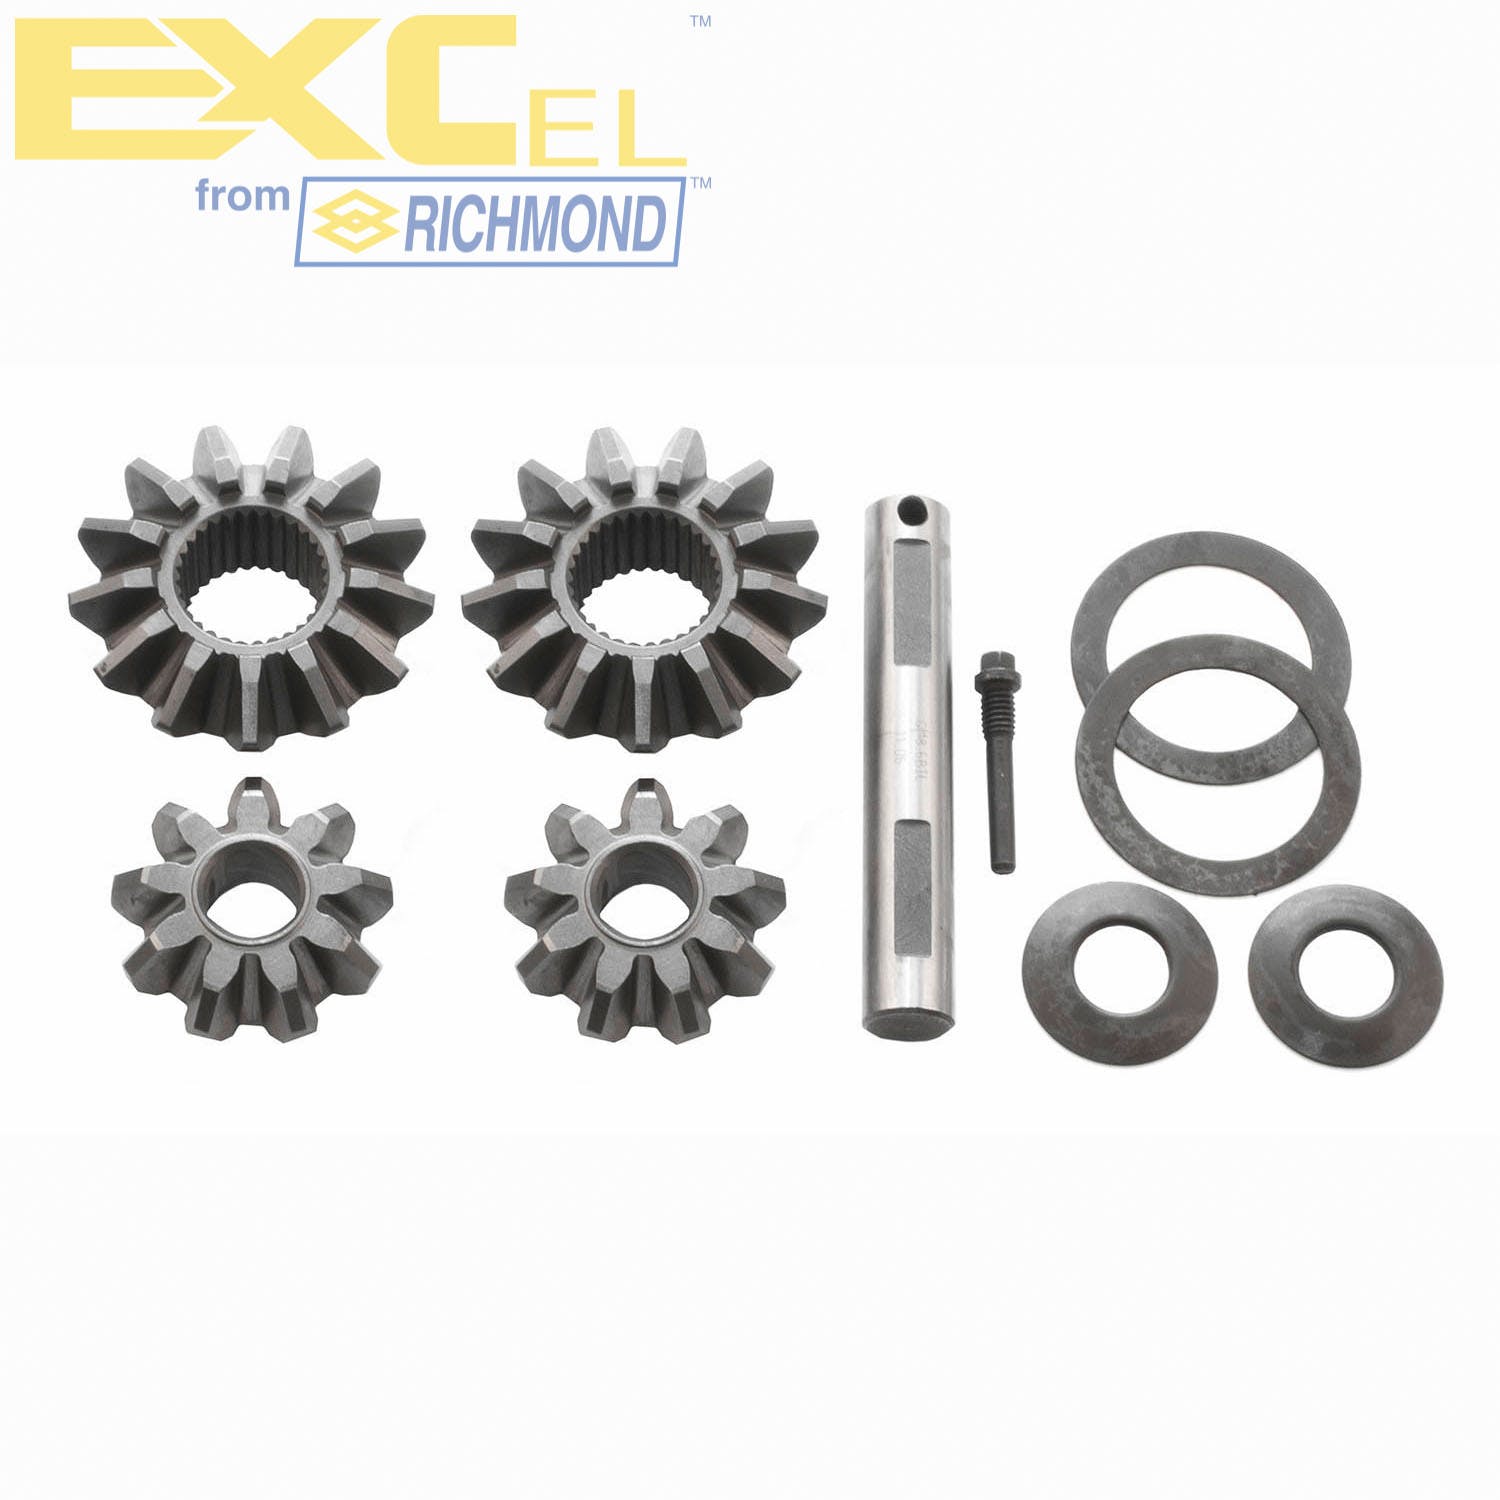 Excel XL-4054 Differential Carrier Gear Kit